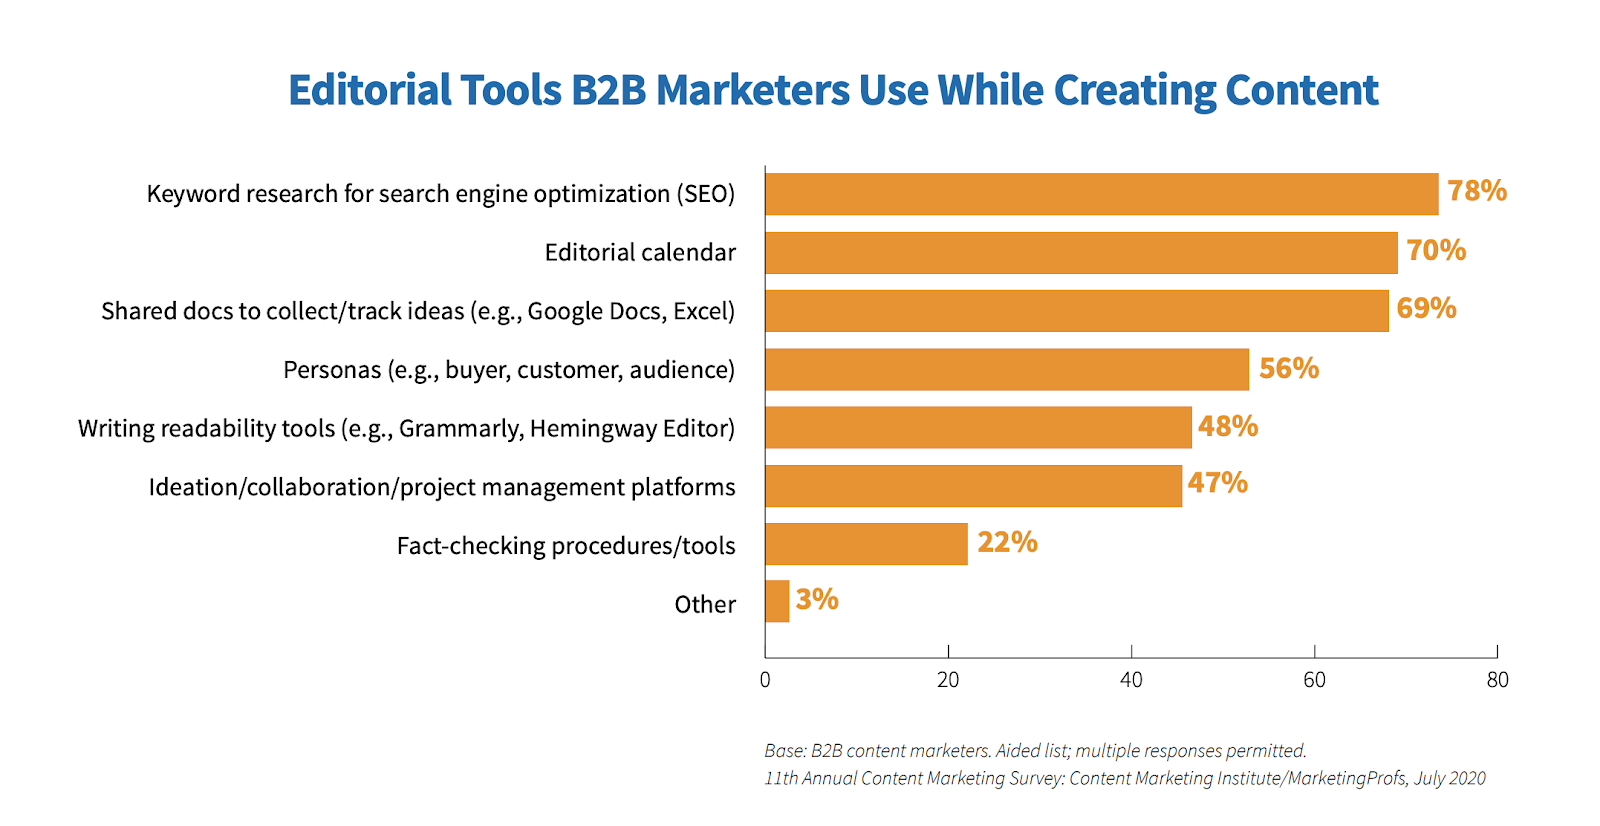 Editorial tools B2B marketers use while creating content 